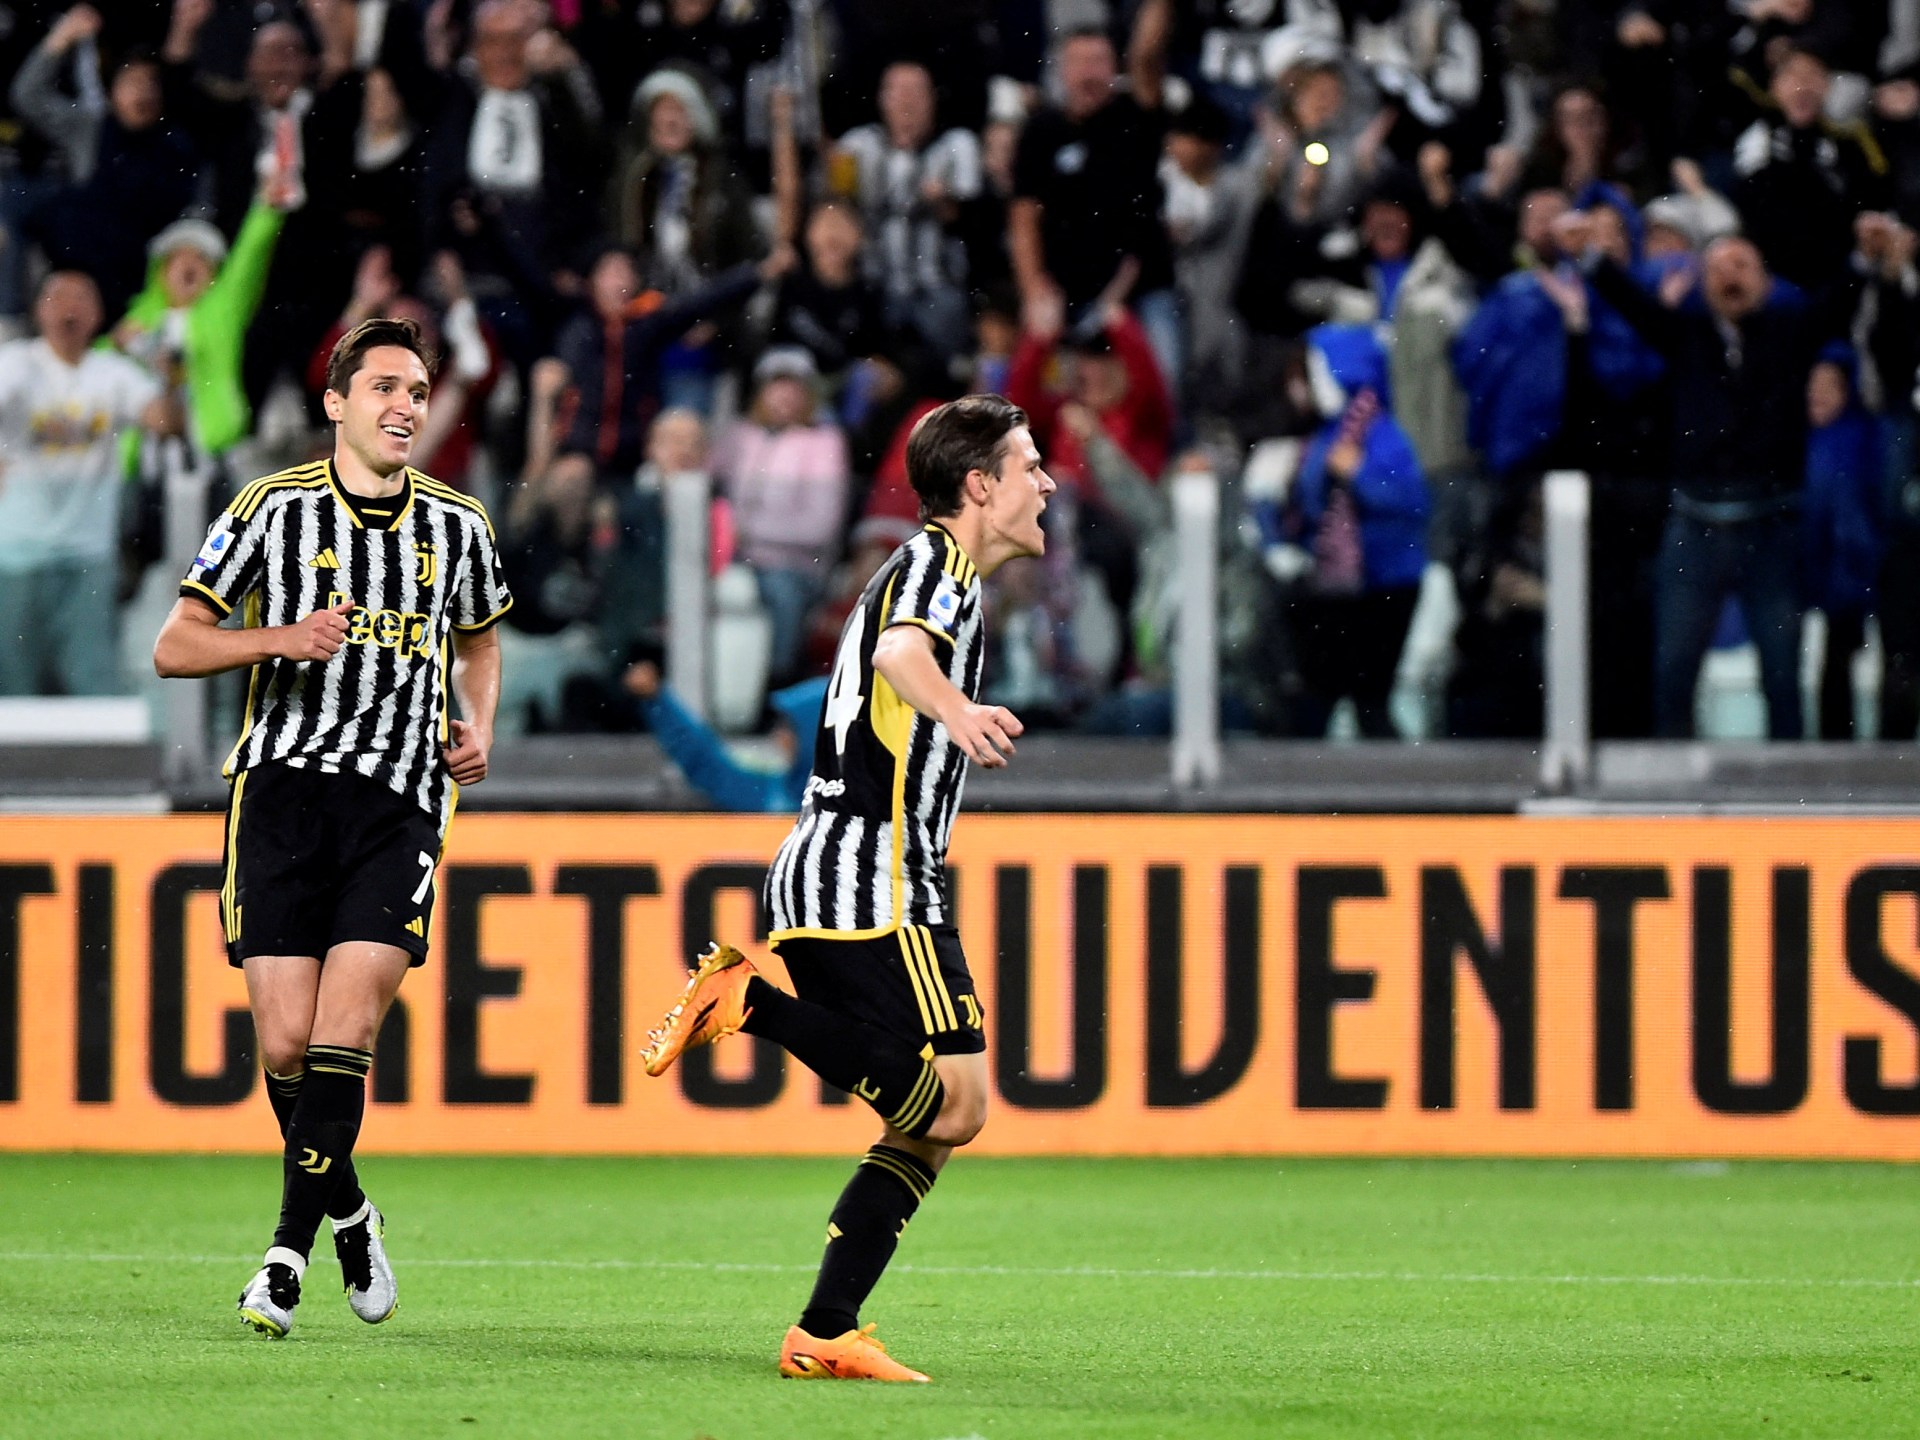 Juventus fined but avoid further points deduction in plea bargain